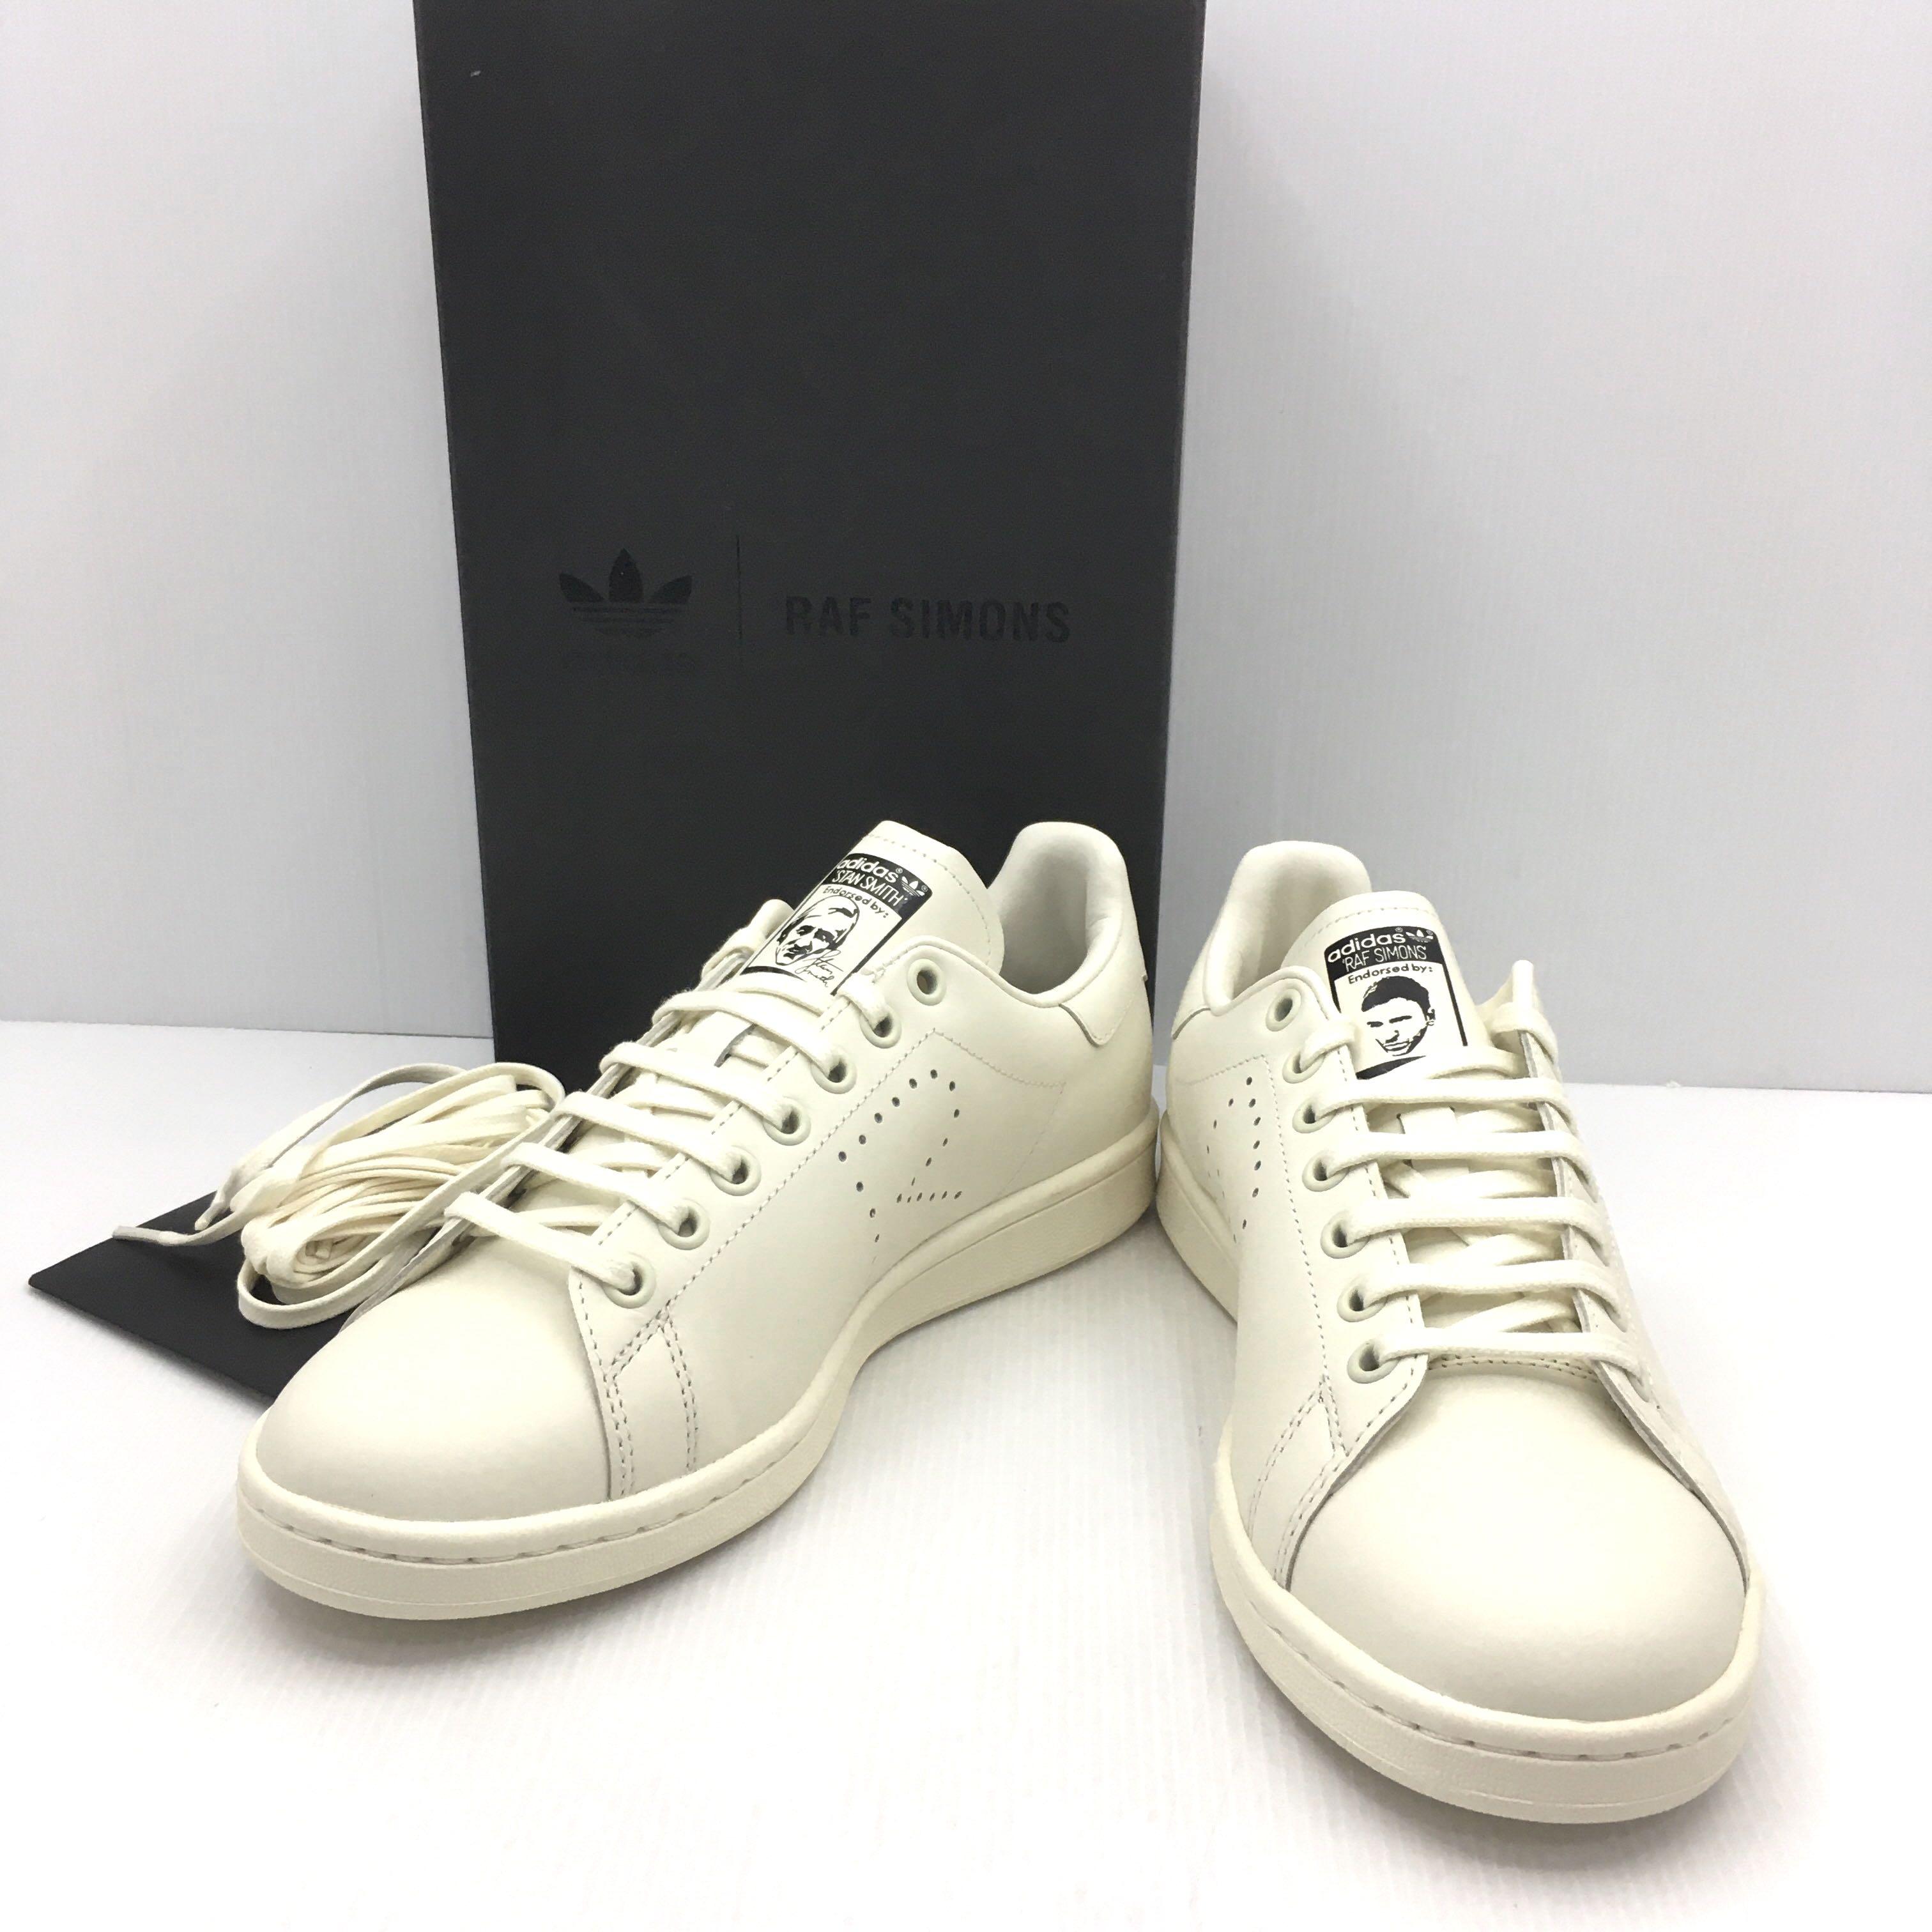 Adidas Stan Smith Raf Simmons Size 39.5 Sneakers 207008229 -, Men's  Fashion, Footwear, Sneakers on Carousell